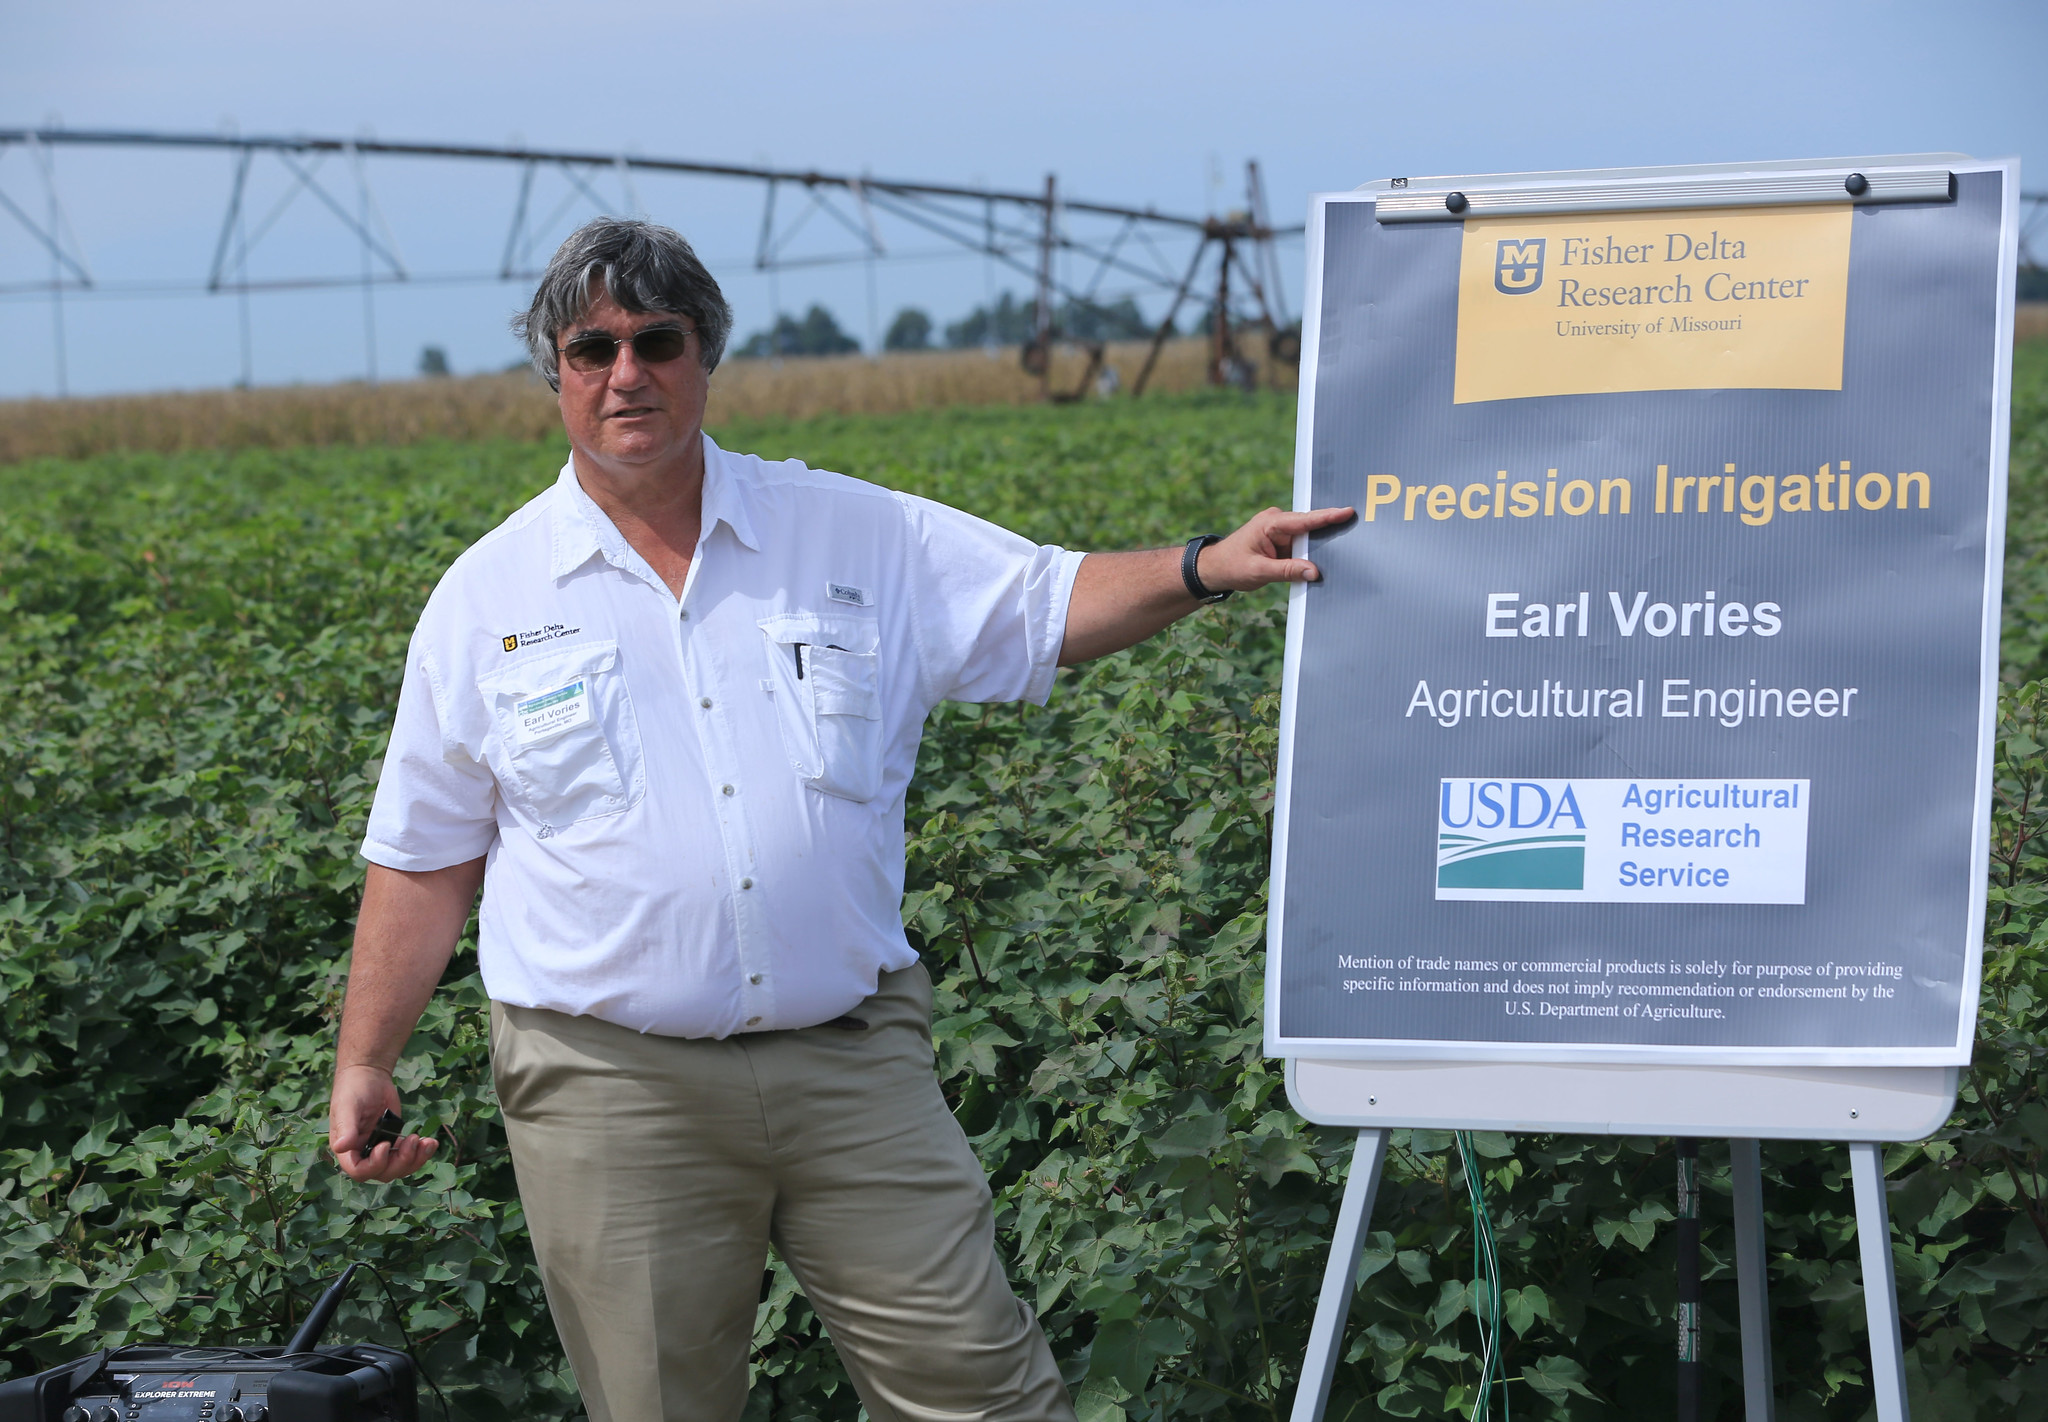 Earl Vories, an agricultural engineer with USDA-ARS, has been studying irrigation on the variable soils at the Fisher Delta Research Center, with a focus during the past five years on variable rate irrigation in cotton fields.